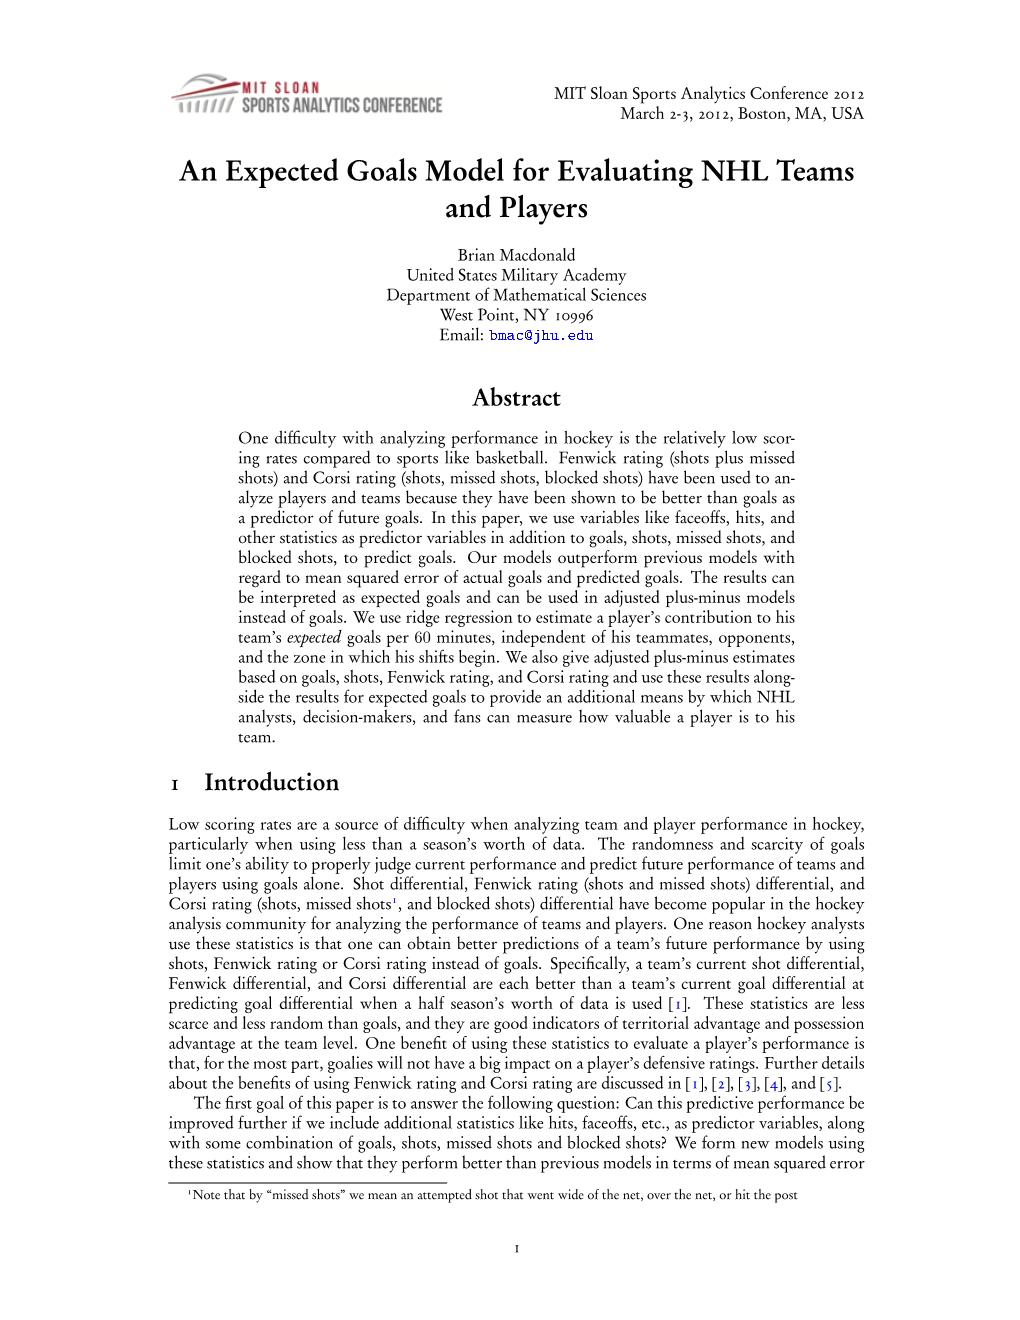 Expected Goals Model for Evaluating NHL Teams and Players